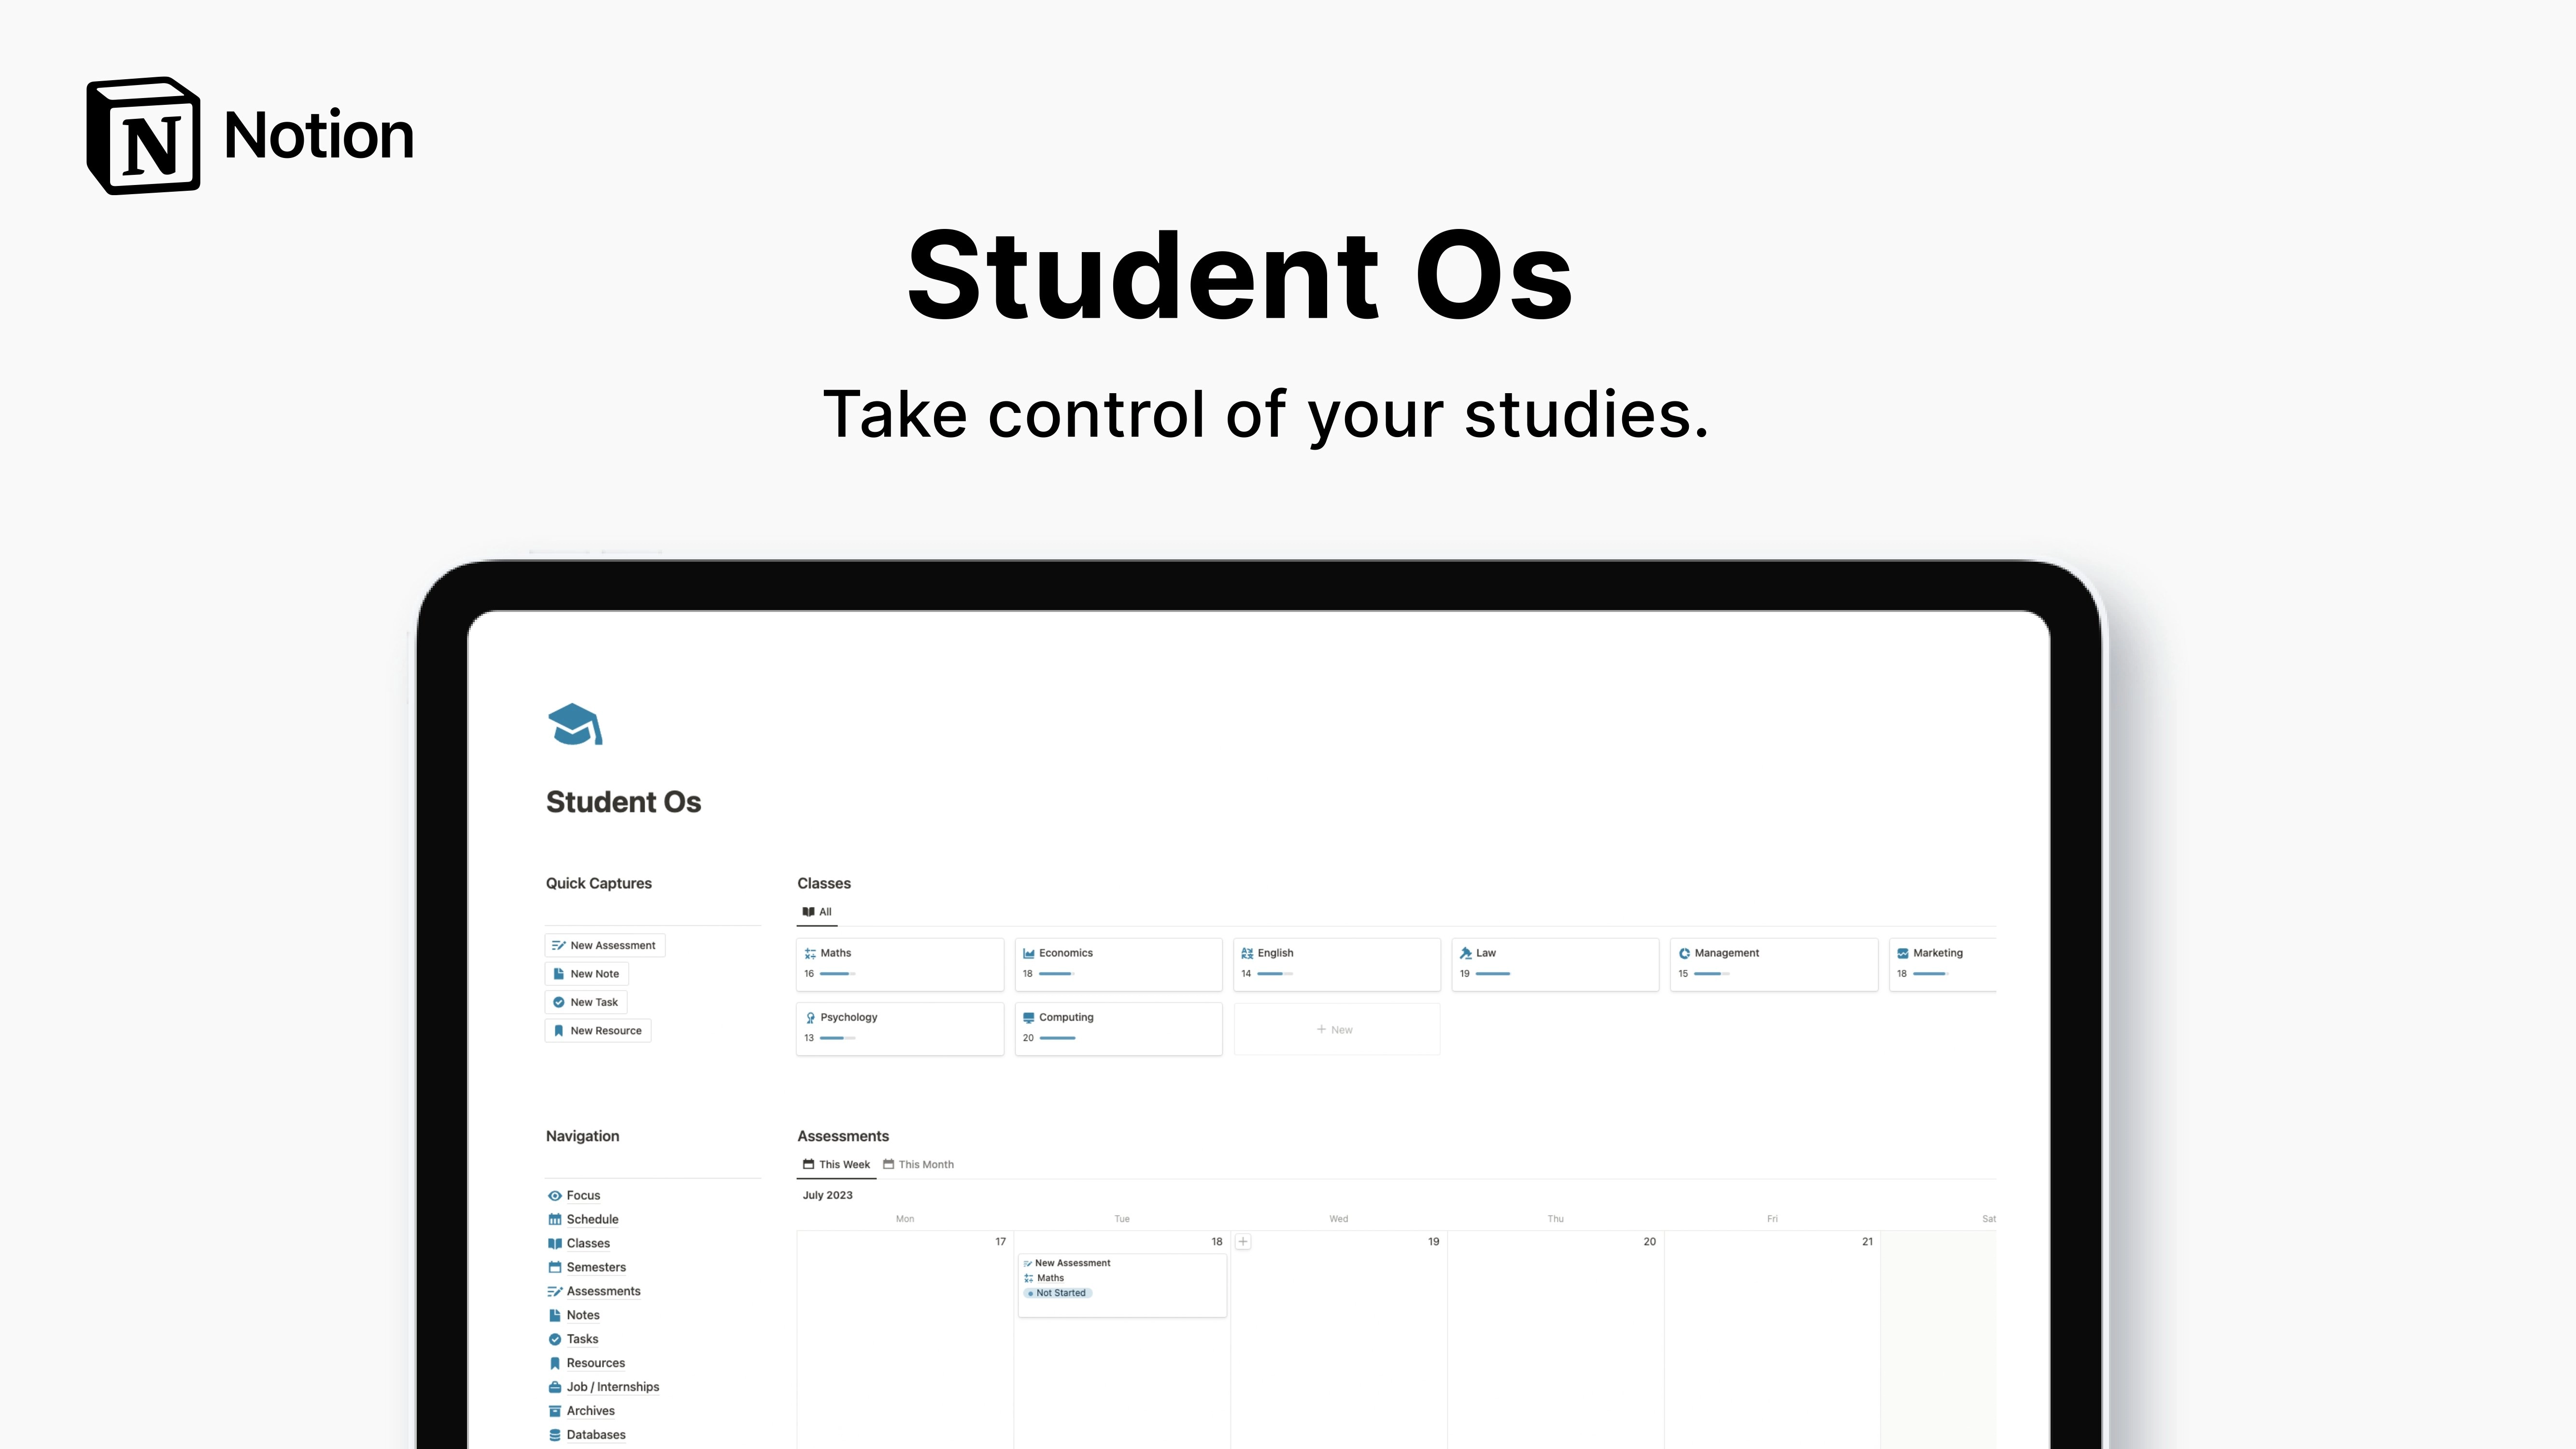 Student Os